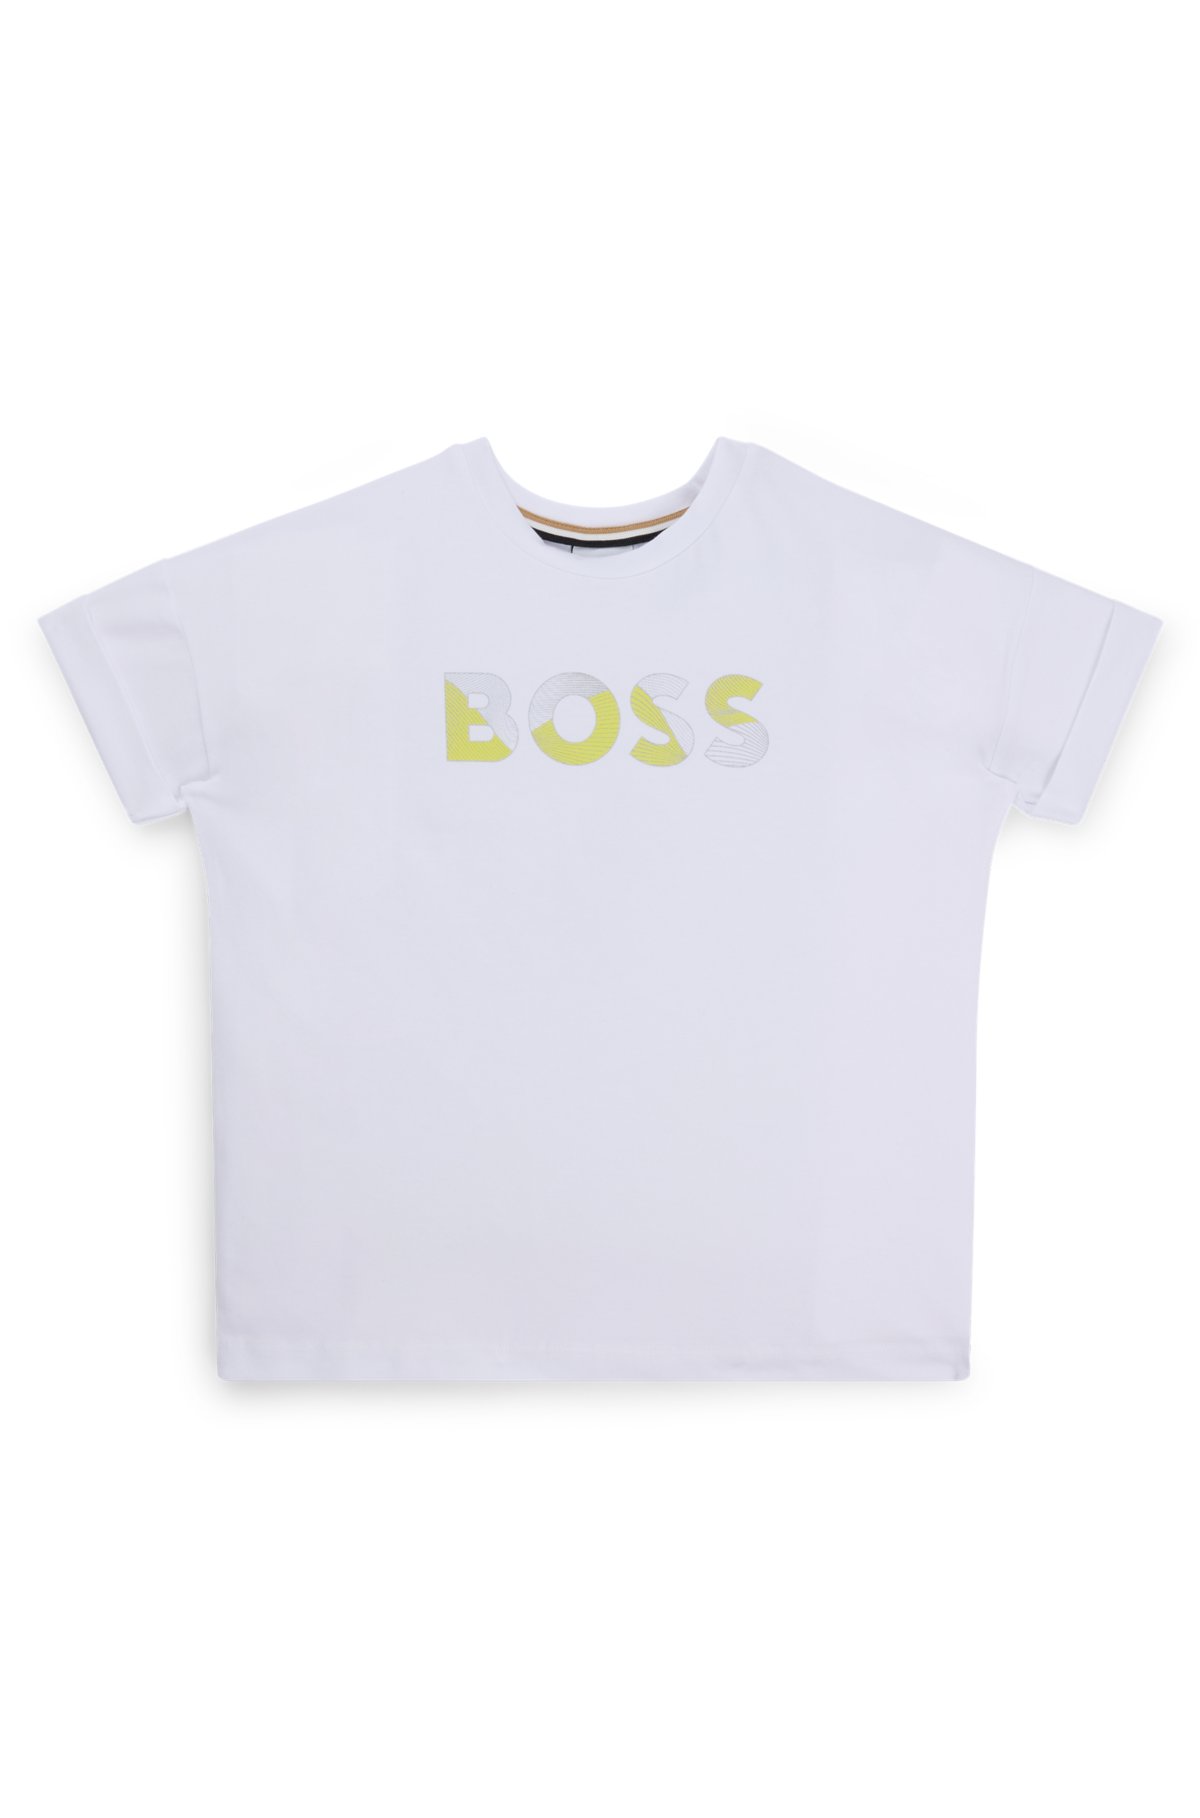 Kids' T-shirt in stretch cotton with lustrous logo print, White